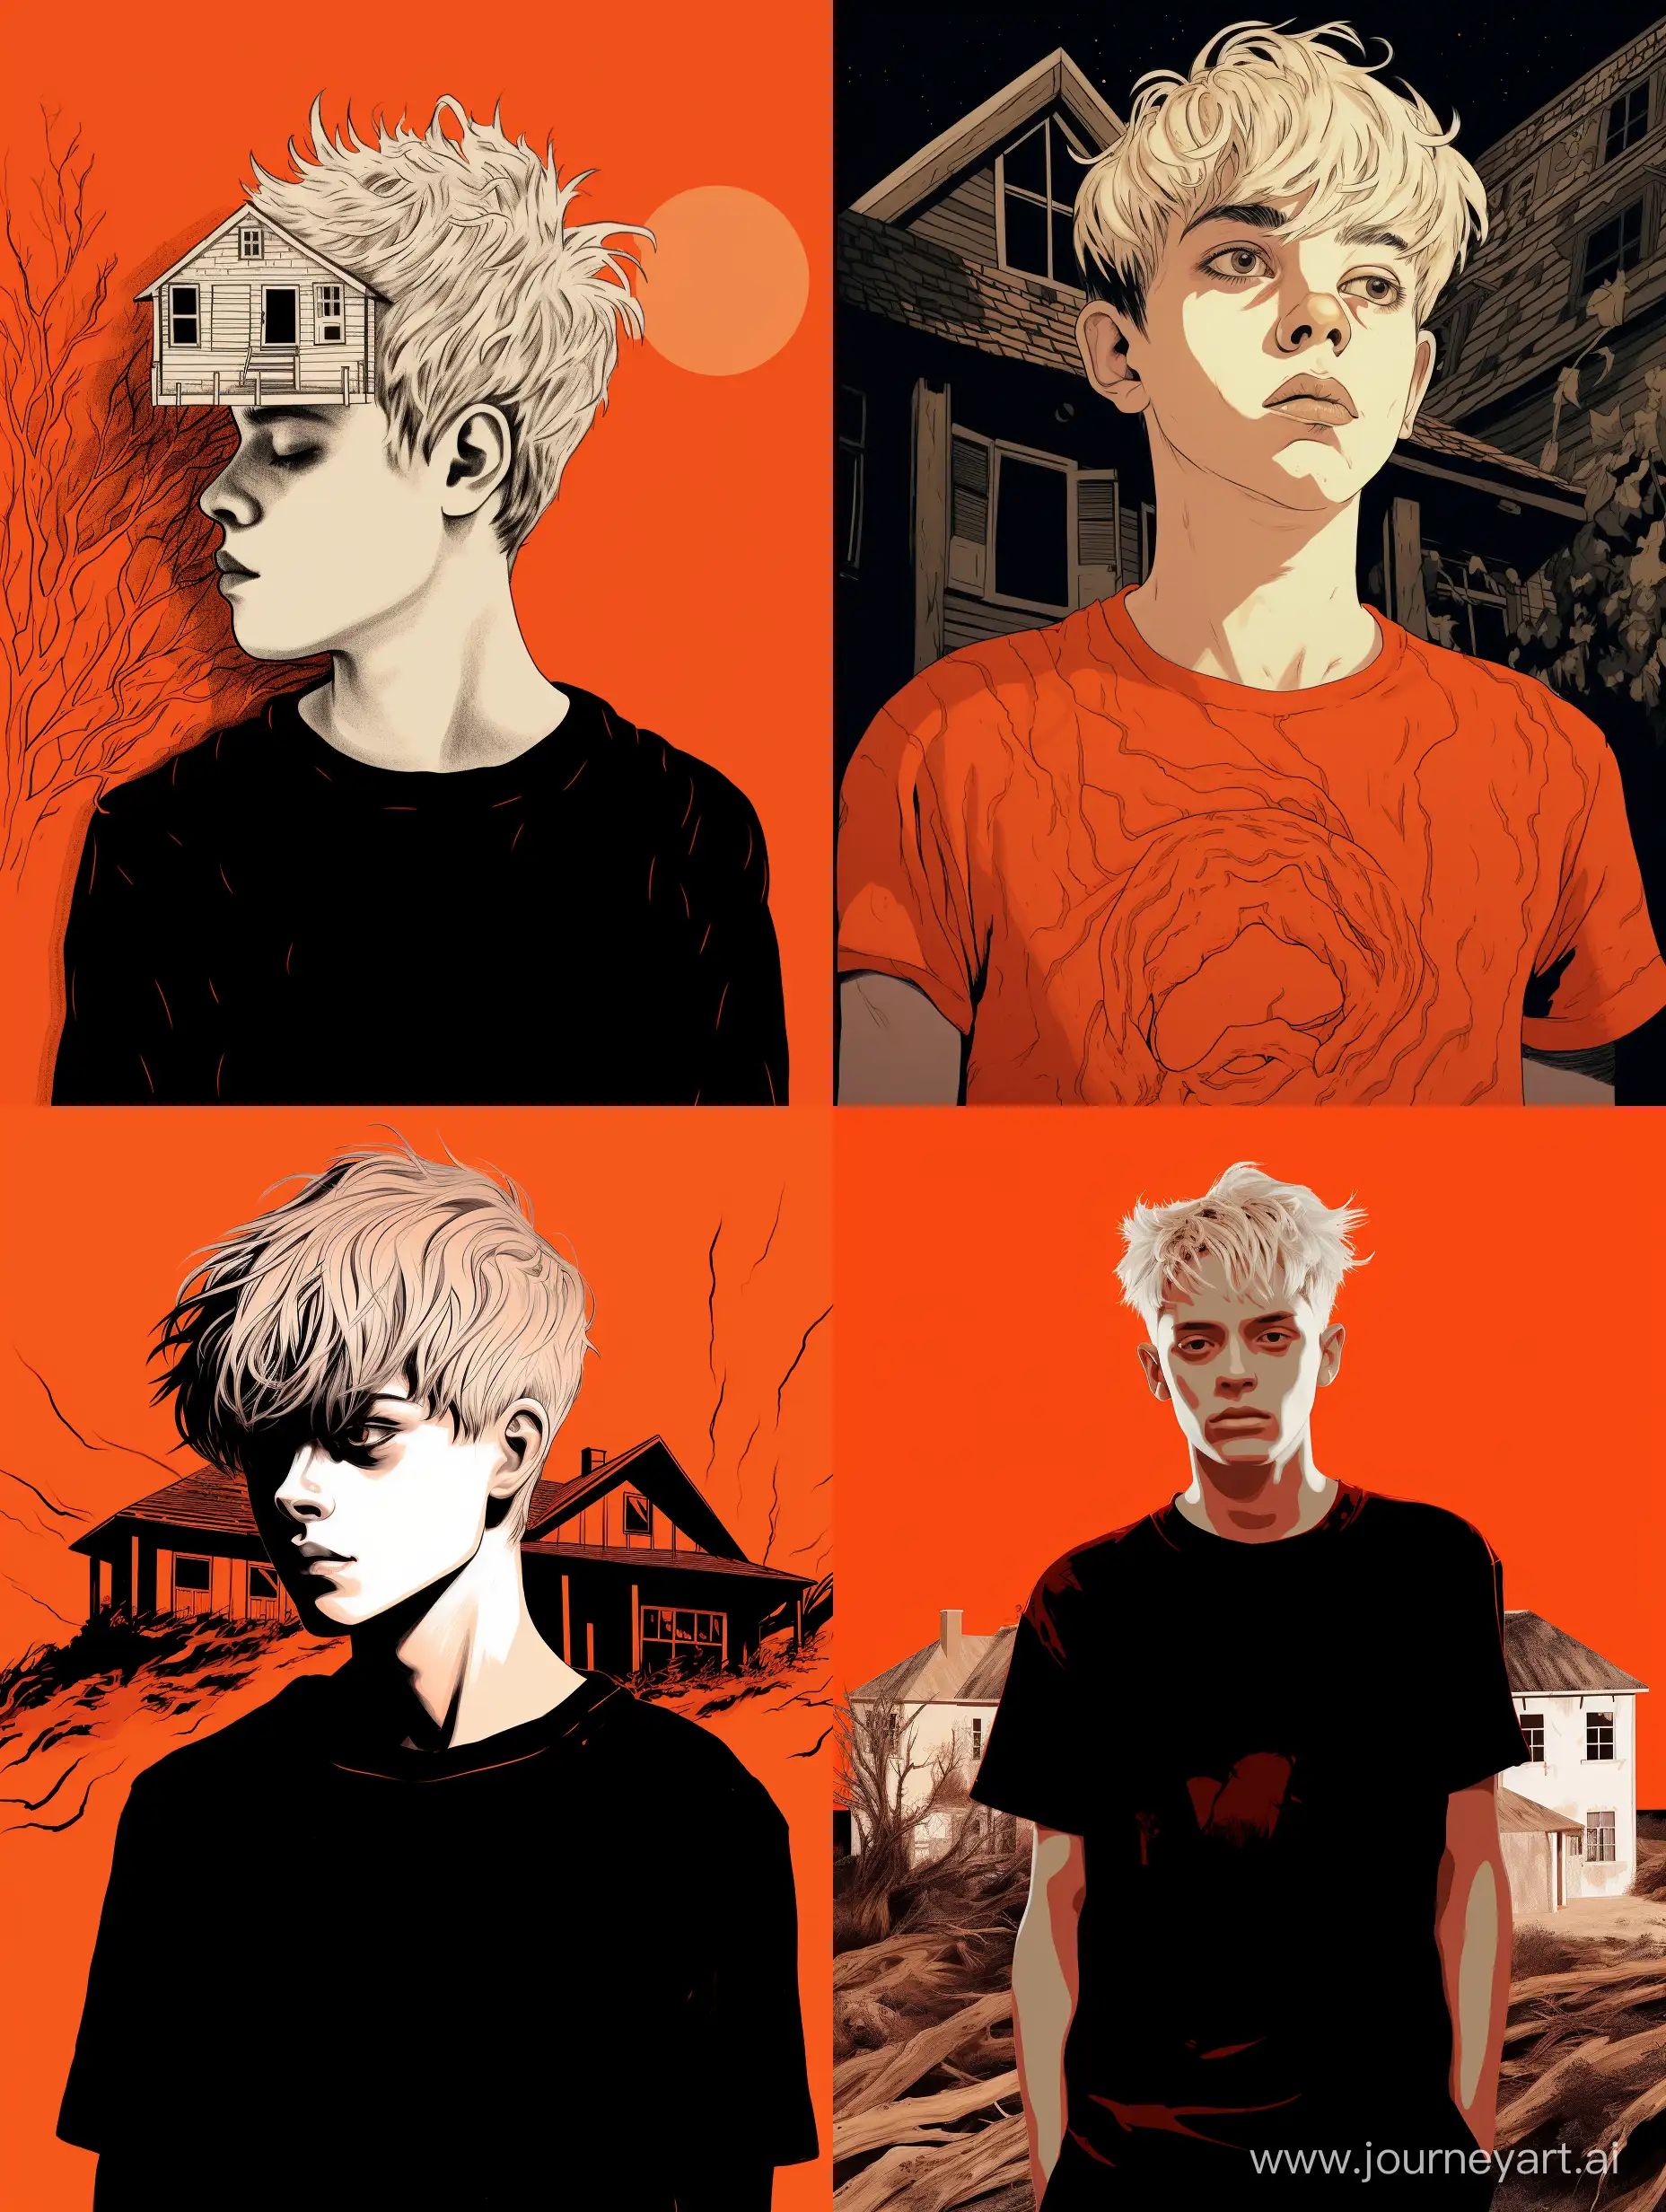 Eerie-WhiteHaired-Teen-with-Black-Roots-and-Orange-Shirt-in-Horror-Setting